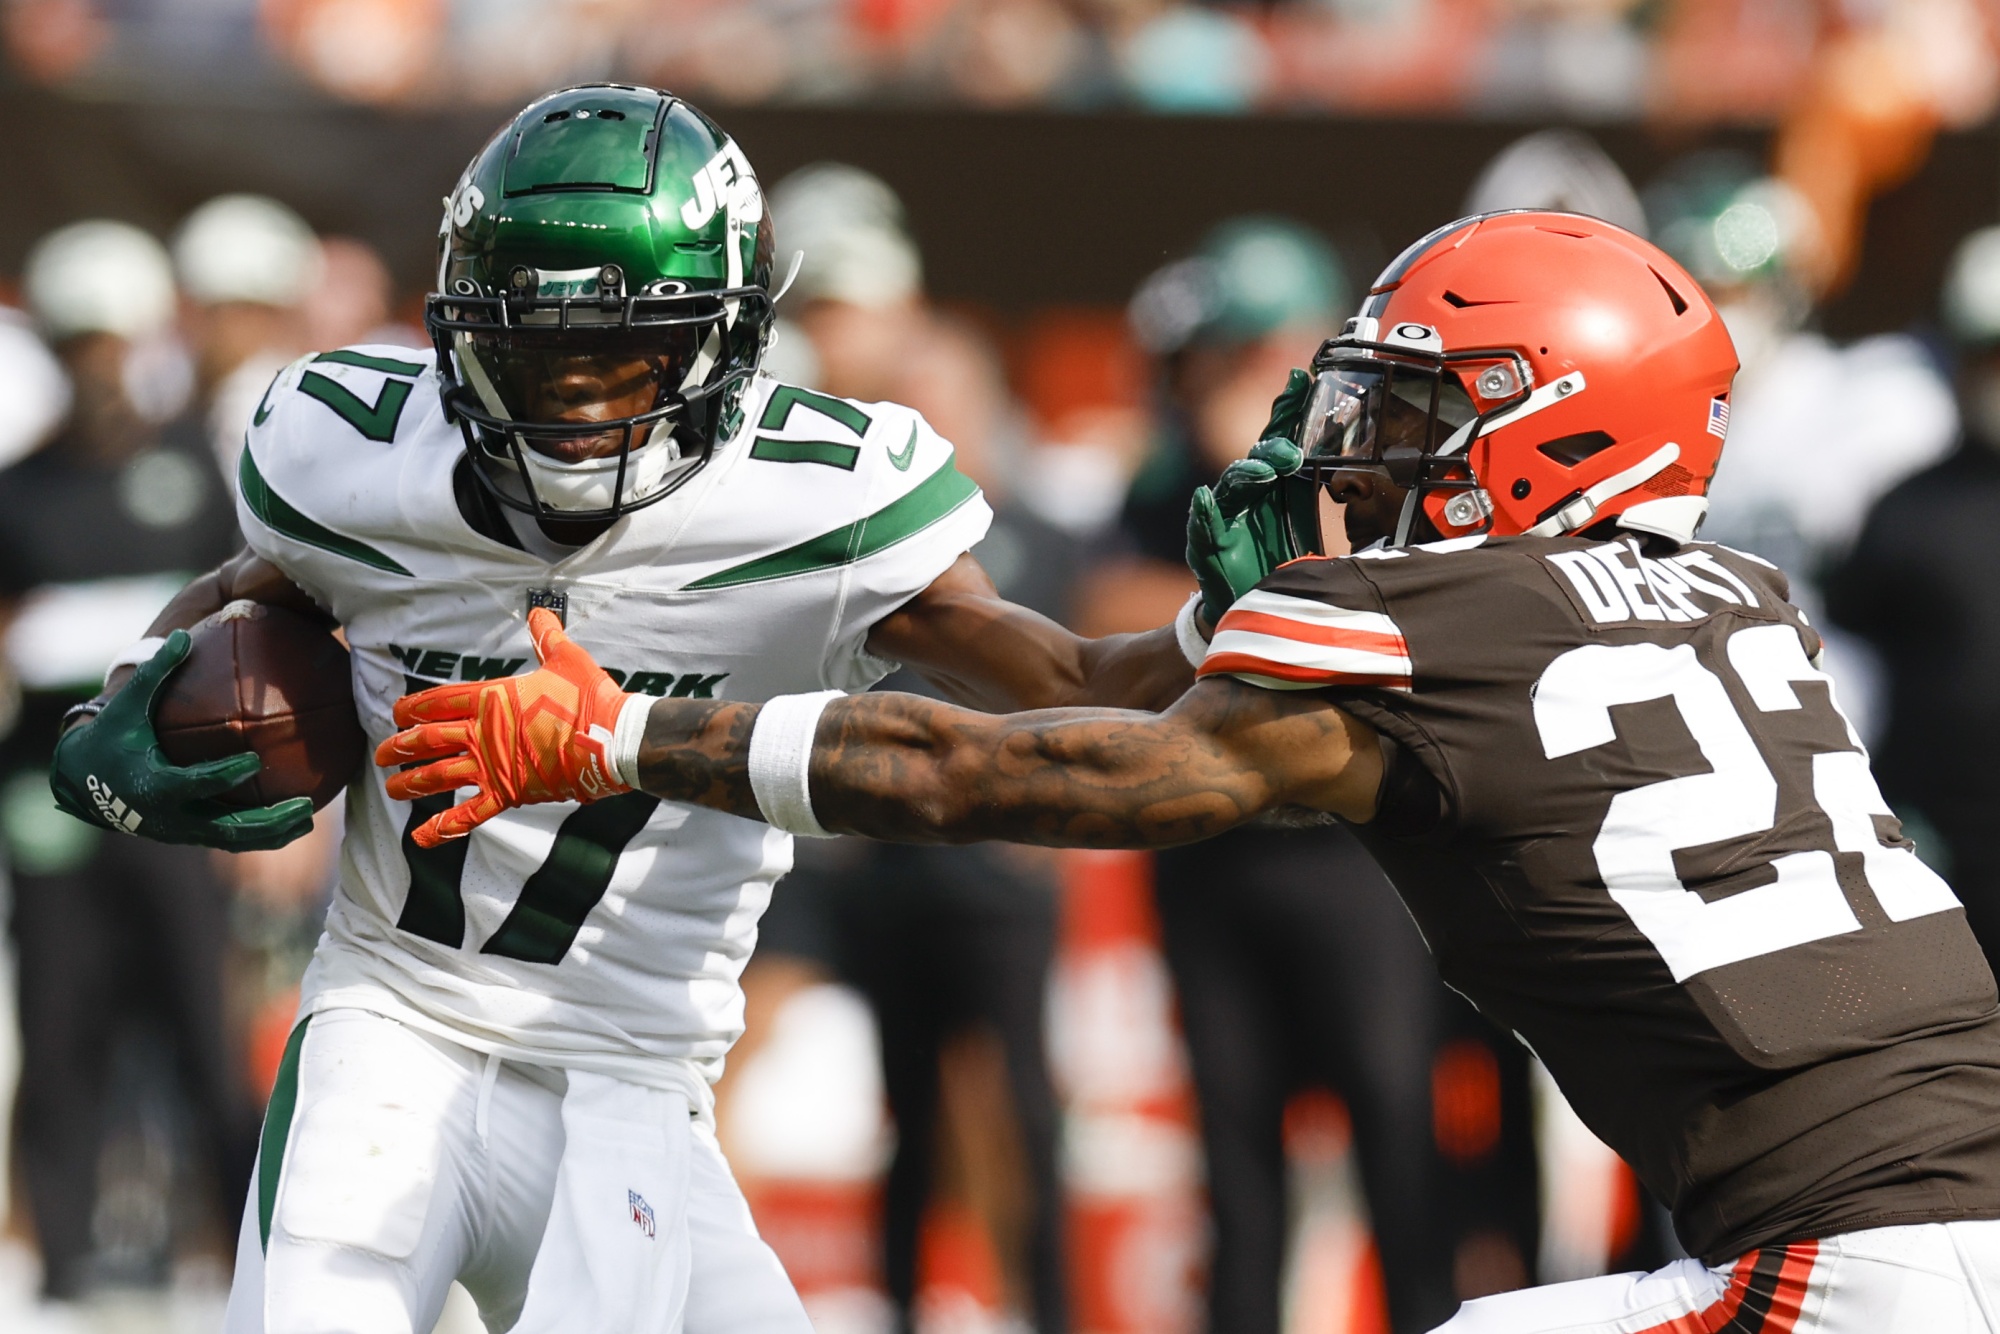 Flacco Rallies Jets to Stunning 31-30 Comeback Over Browns - Bloomberg